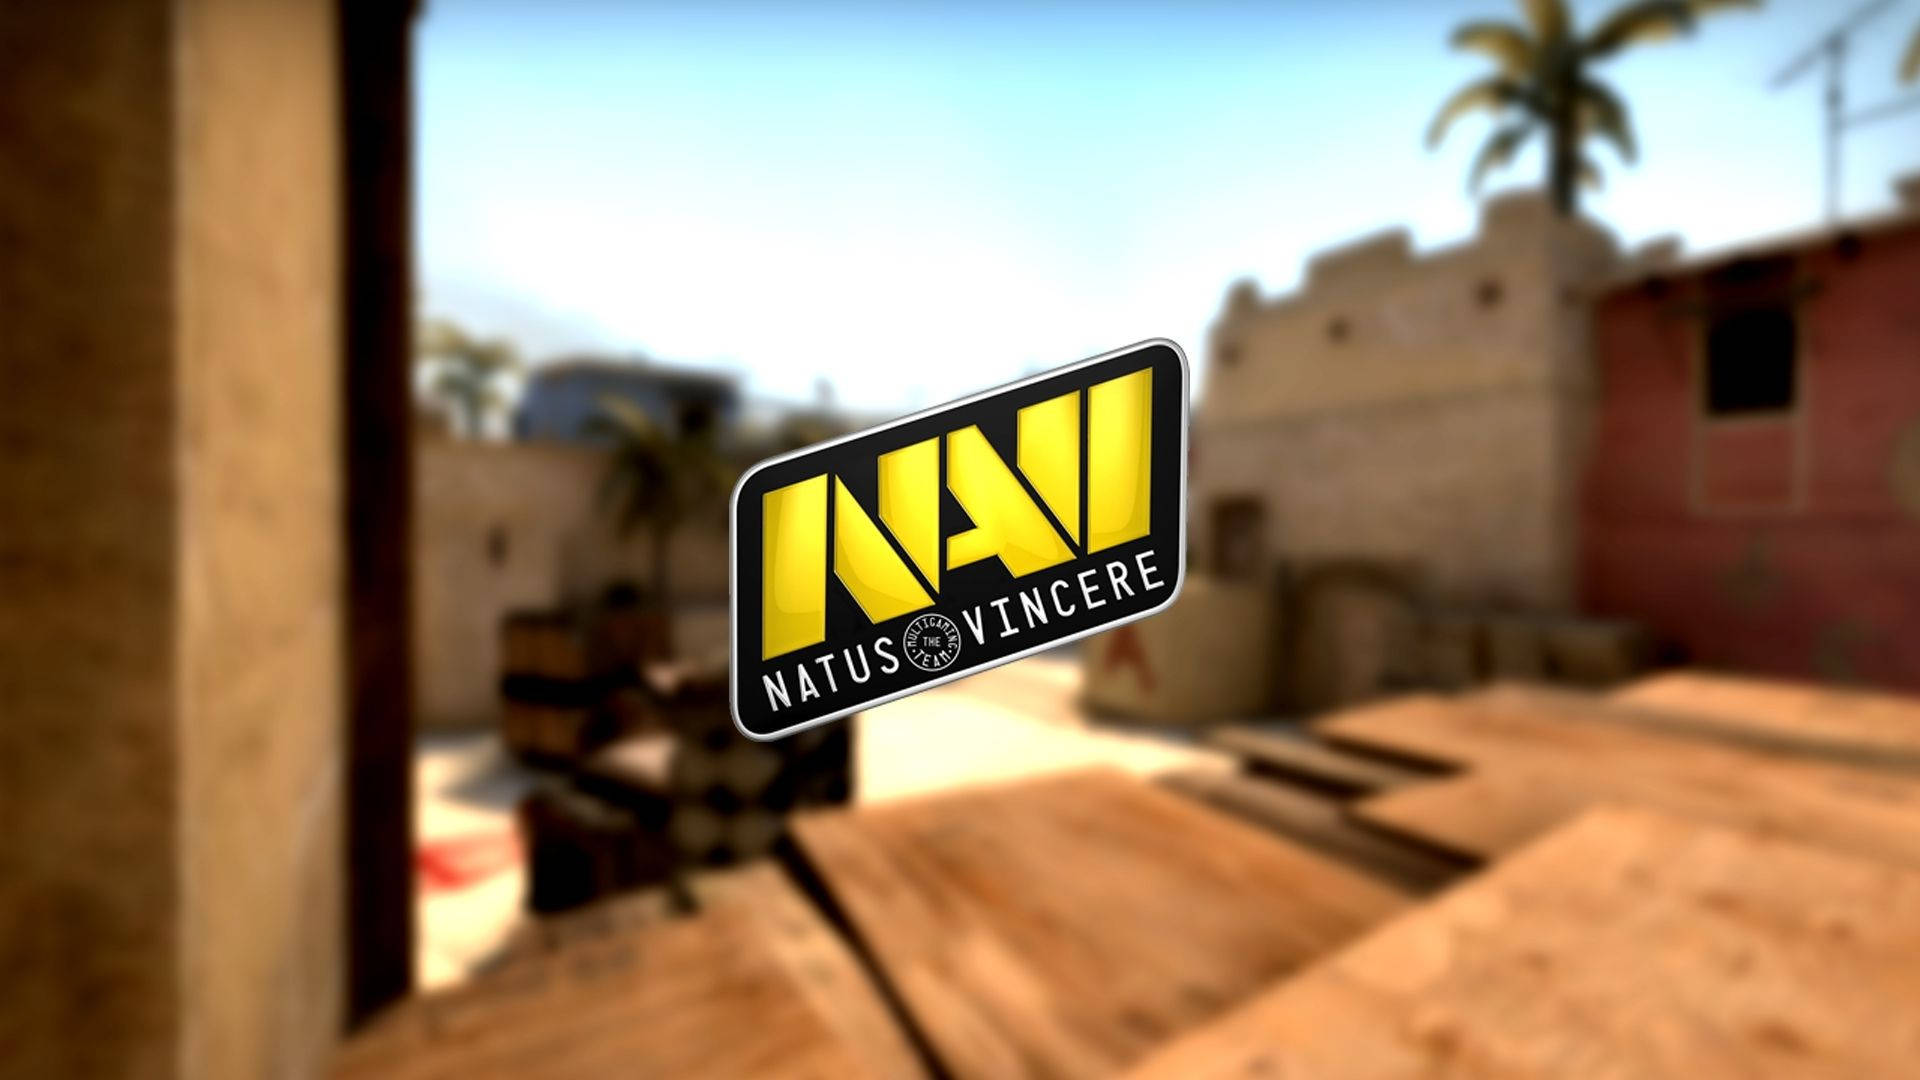 Natus Vincere On The Battlefield